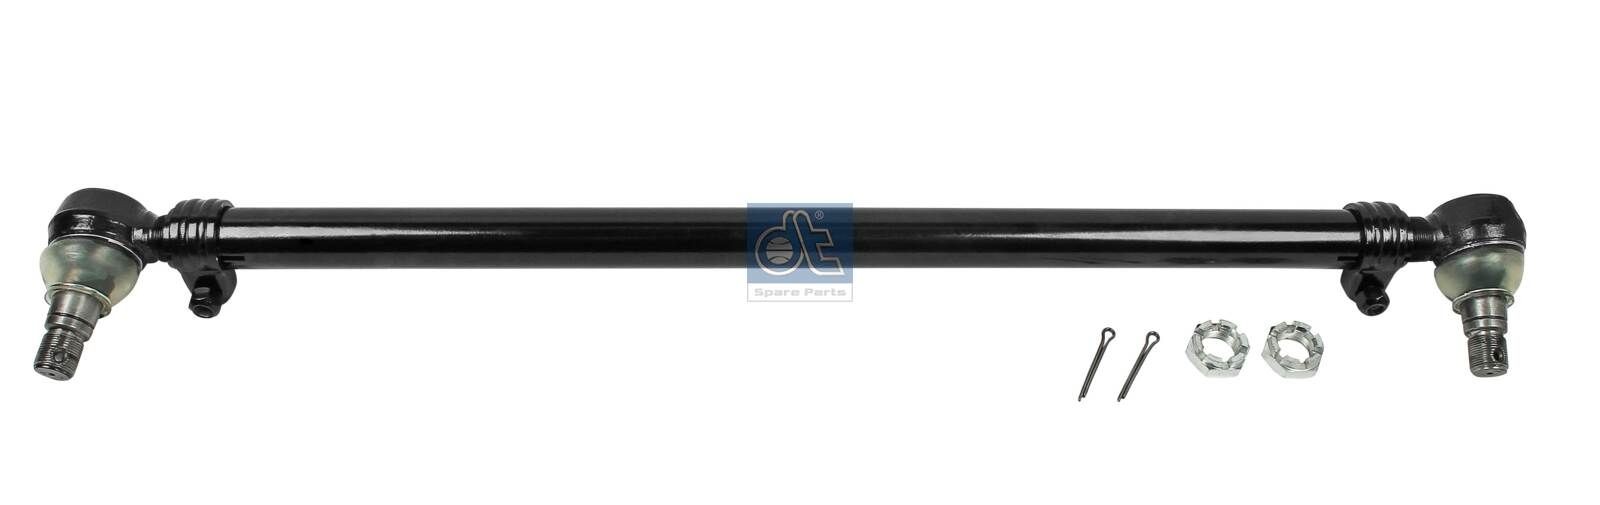 Ford TRANSIT Tie rod axle joint 7337361 DT Spare Parts 4.65664 online buy